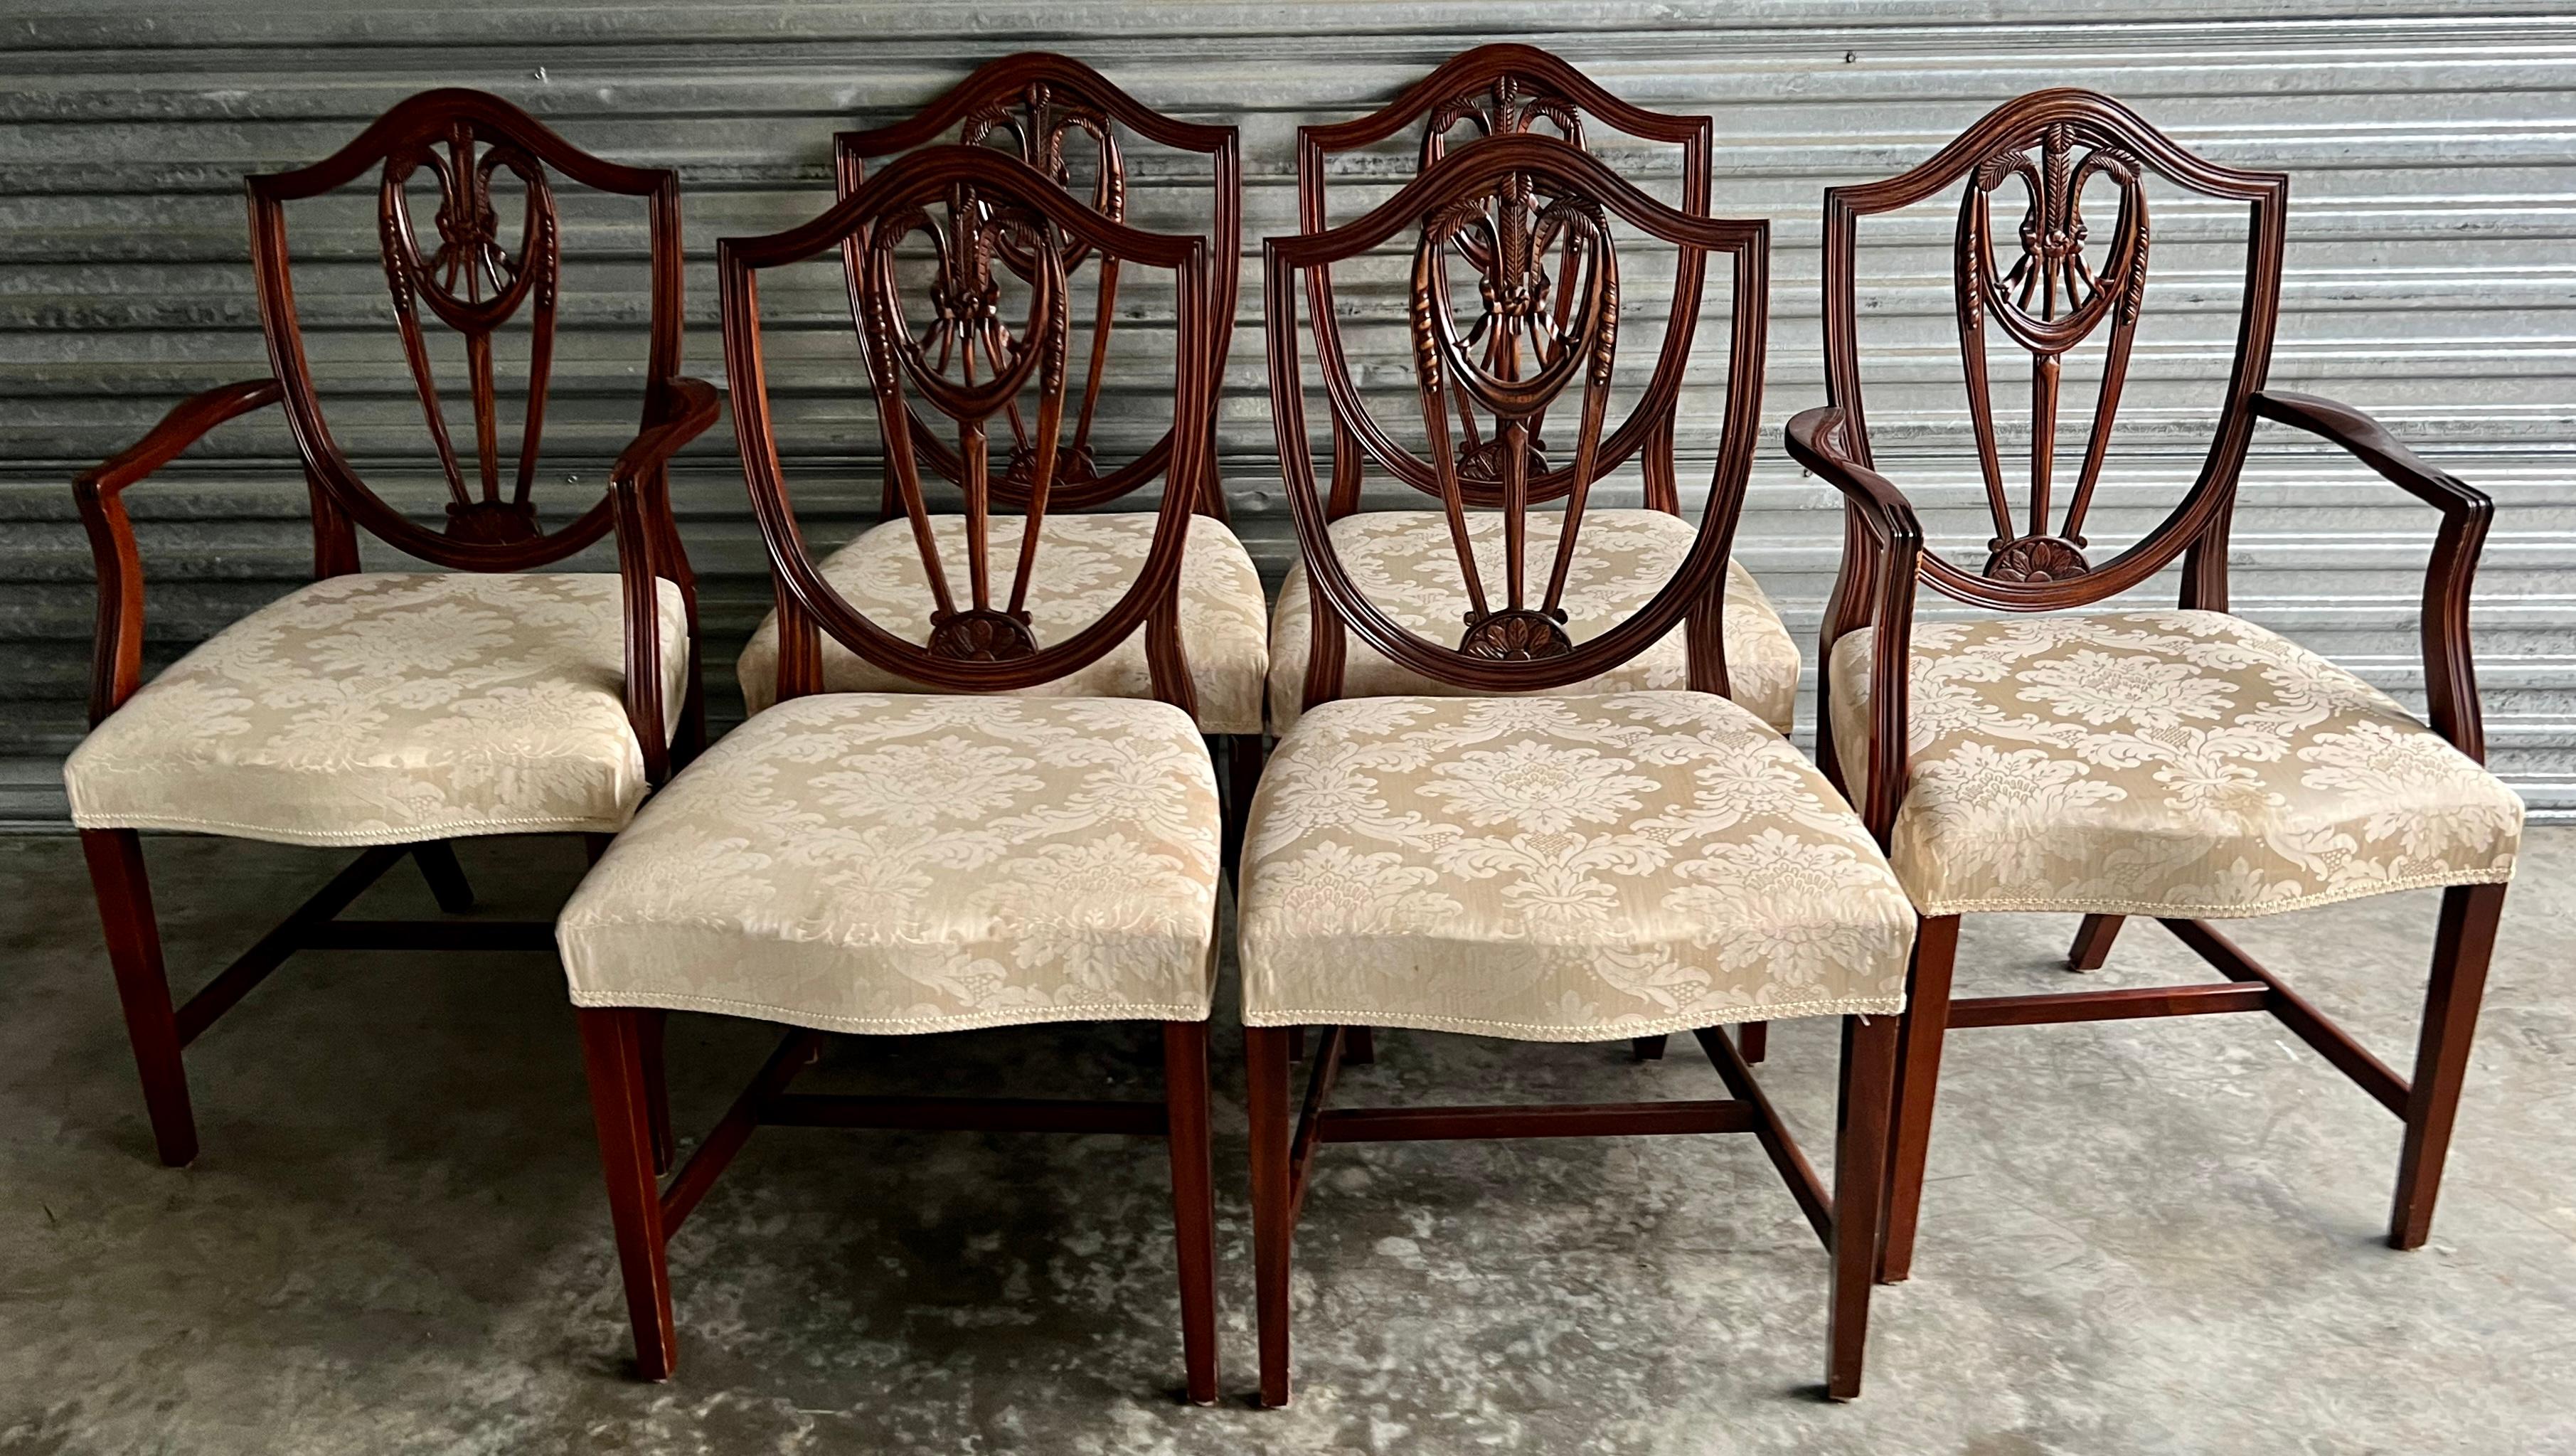 This is a set of mid-century English carved mahogany Hepplewhite style dining chairs by Bevan Funnell Ltd. The damask upholstery is vintage and does show some where. Measures: Arm; 22” L x 23” W x 38.5” H. Arm; 27” H.